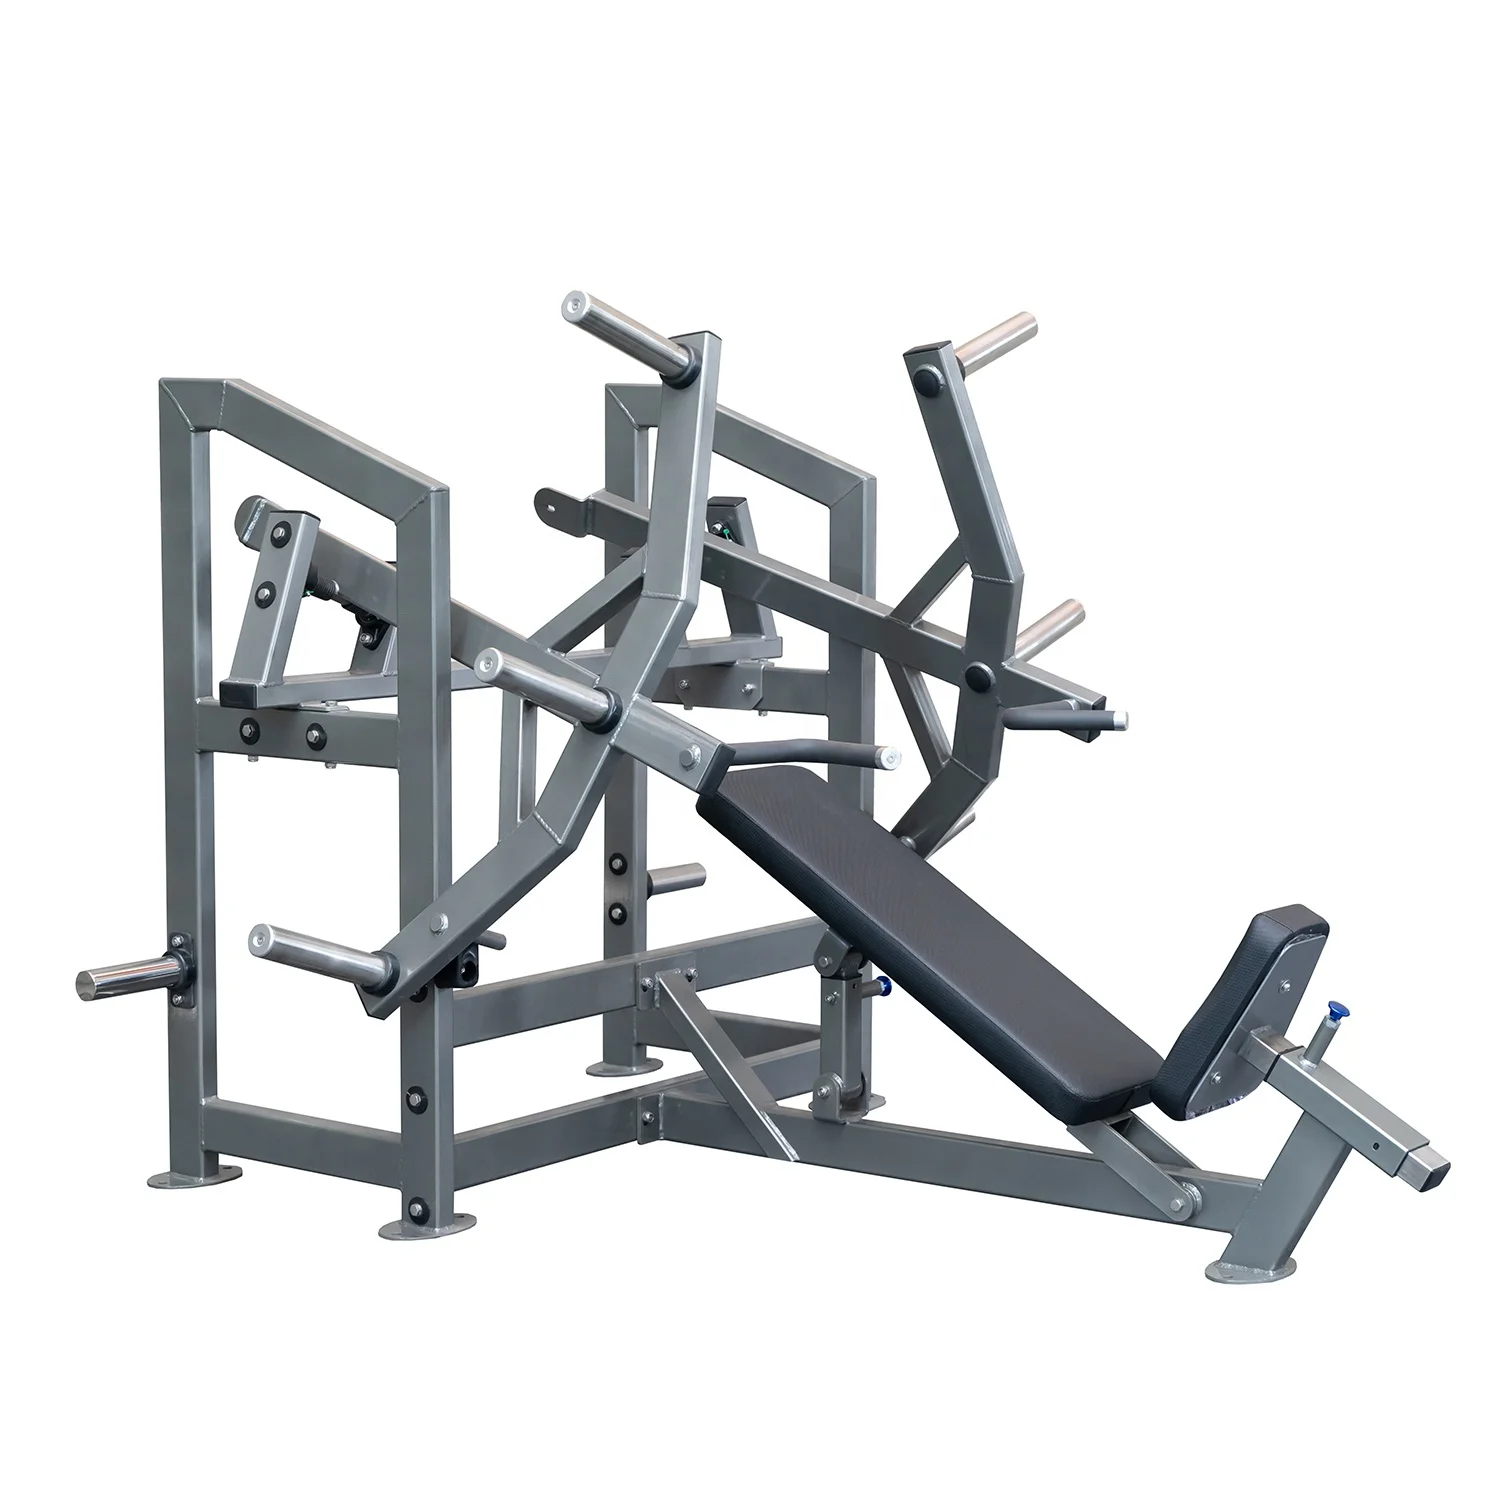 Prime Fitness Plate Loaded Incline Press P-120, 44% OFF